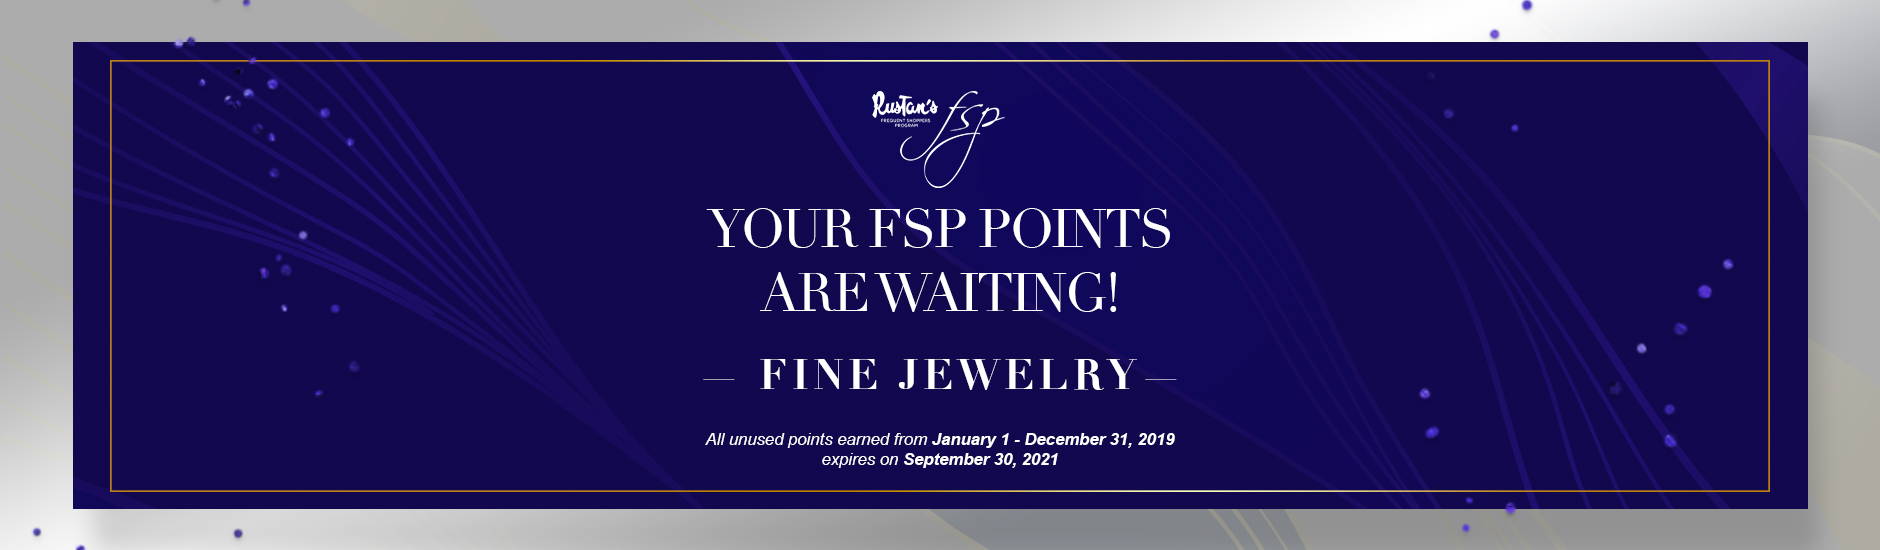 Your FSP Points are Waiting this September: Fine Jewelry